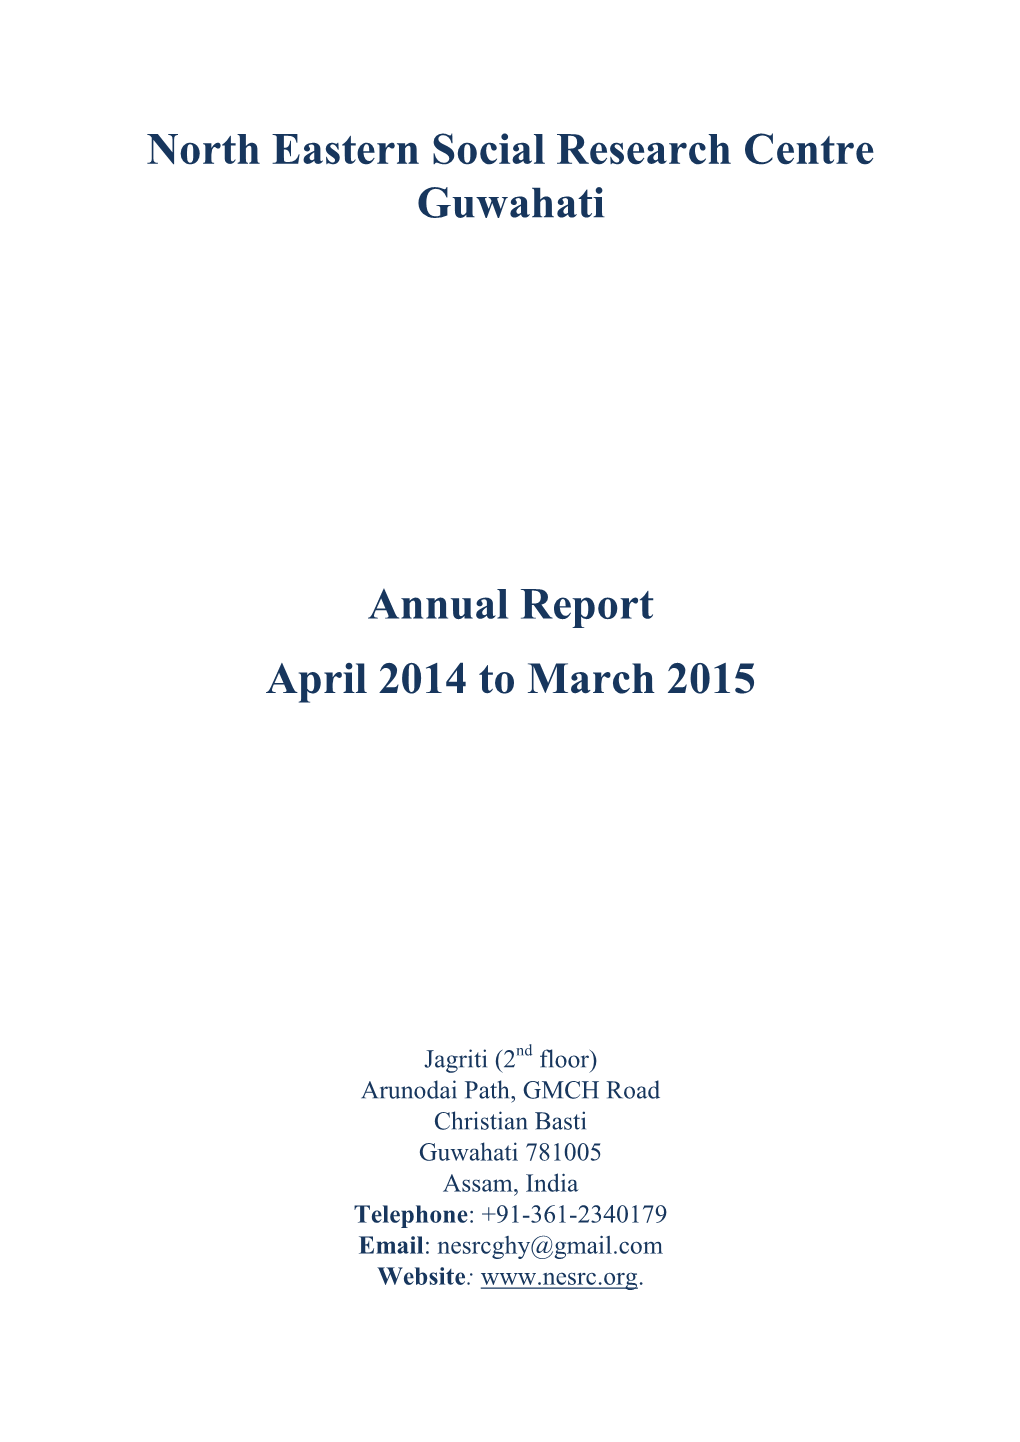 North Eastern Social Research Centre Guwahati Annual Report